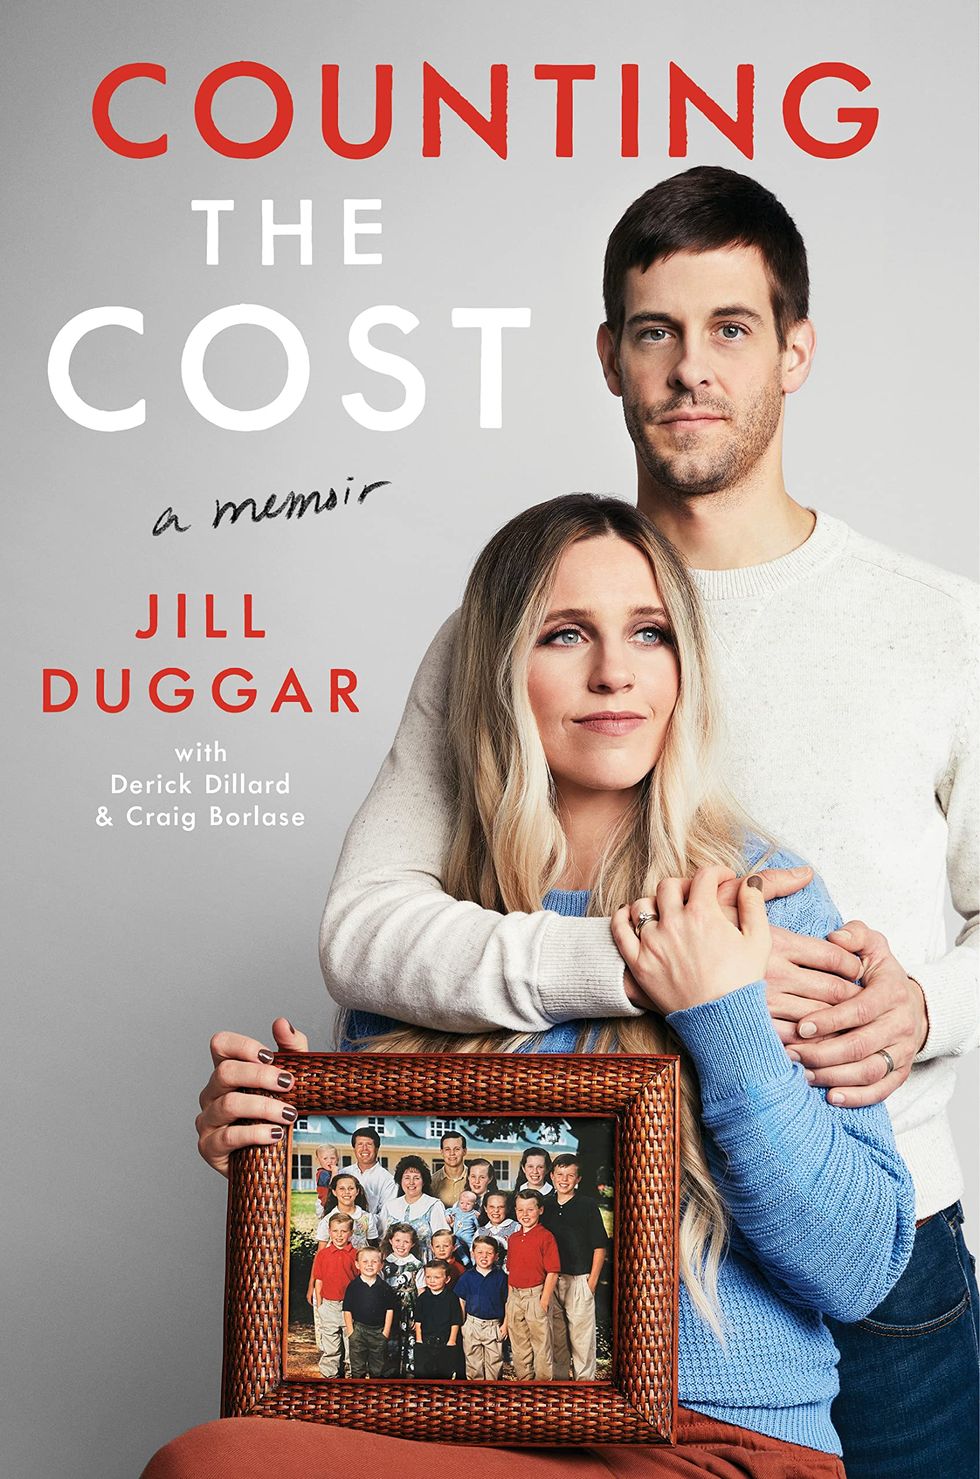 Counting the Cost by Jill Duggar